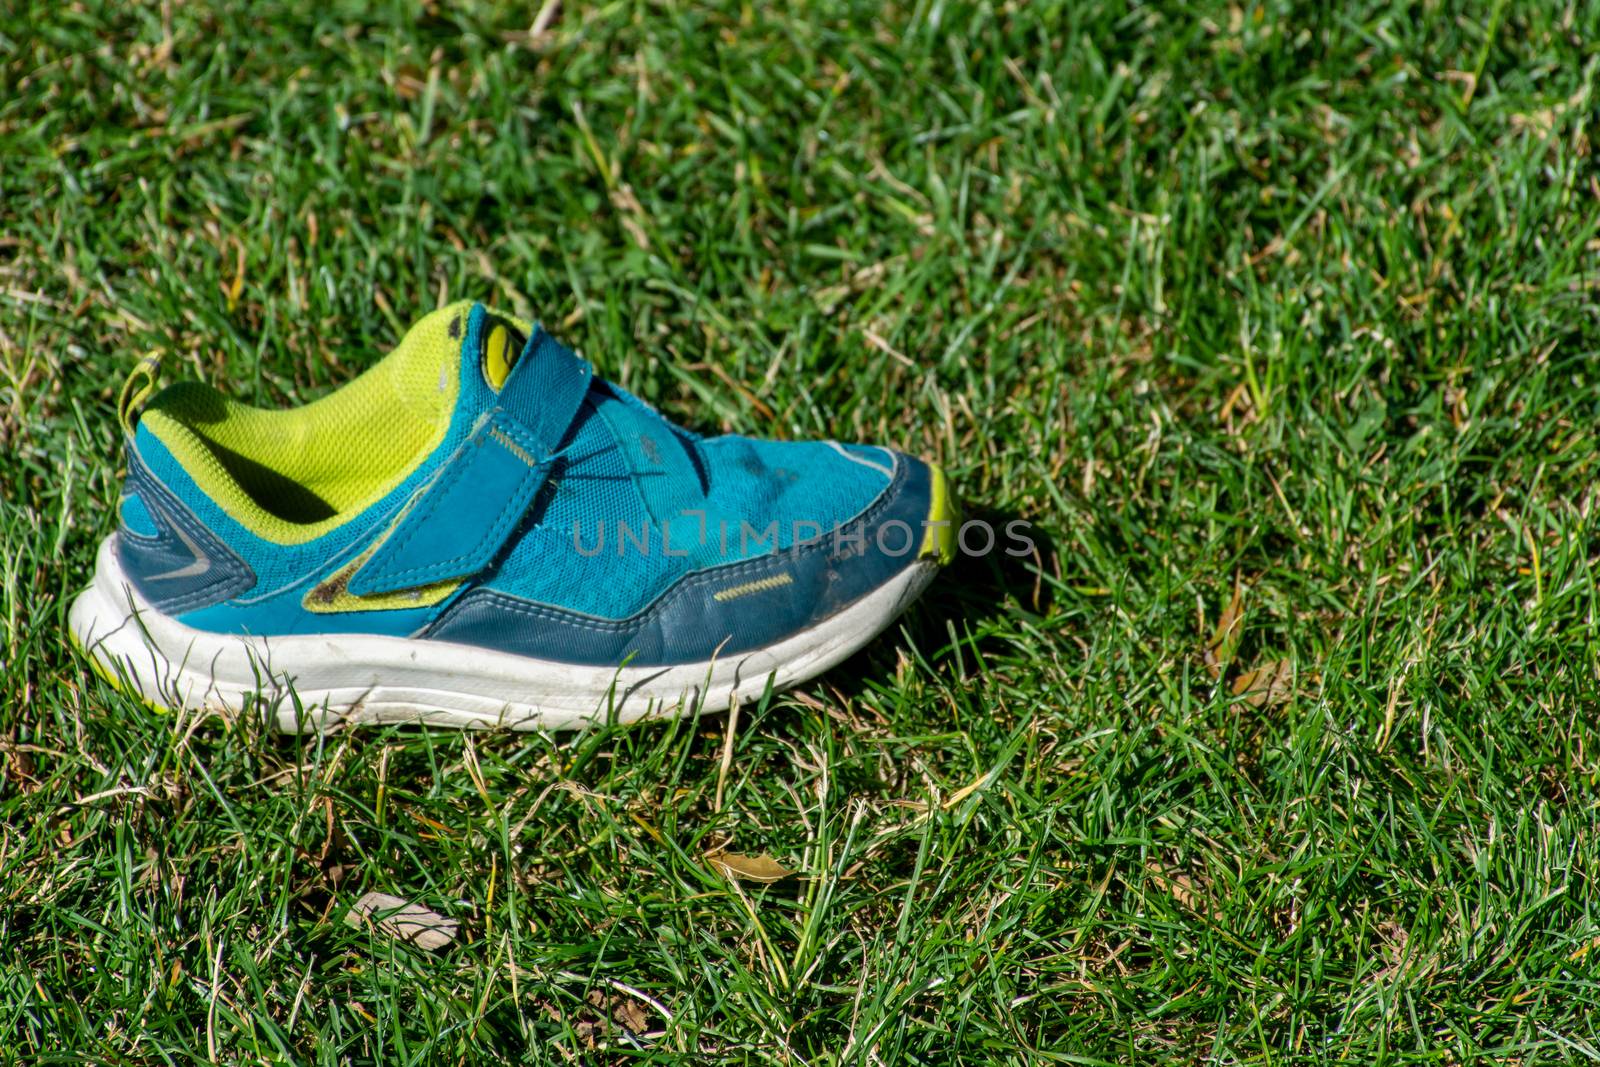 Child's blue and green shoe sits in the sunshine on the green grass prepared for activity and sports in the summer.